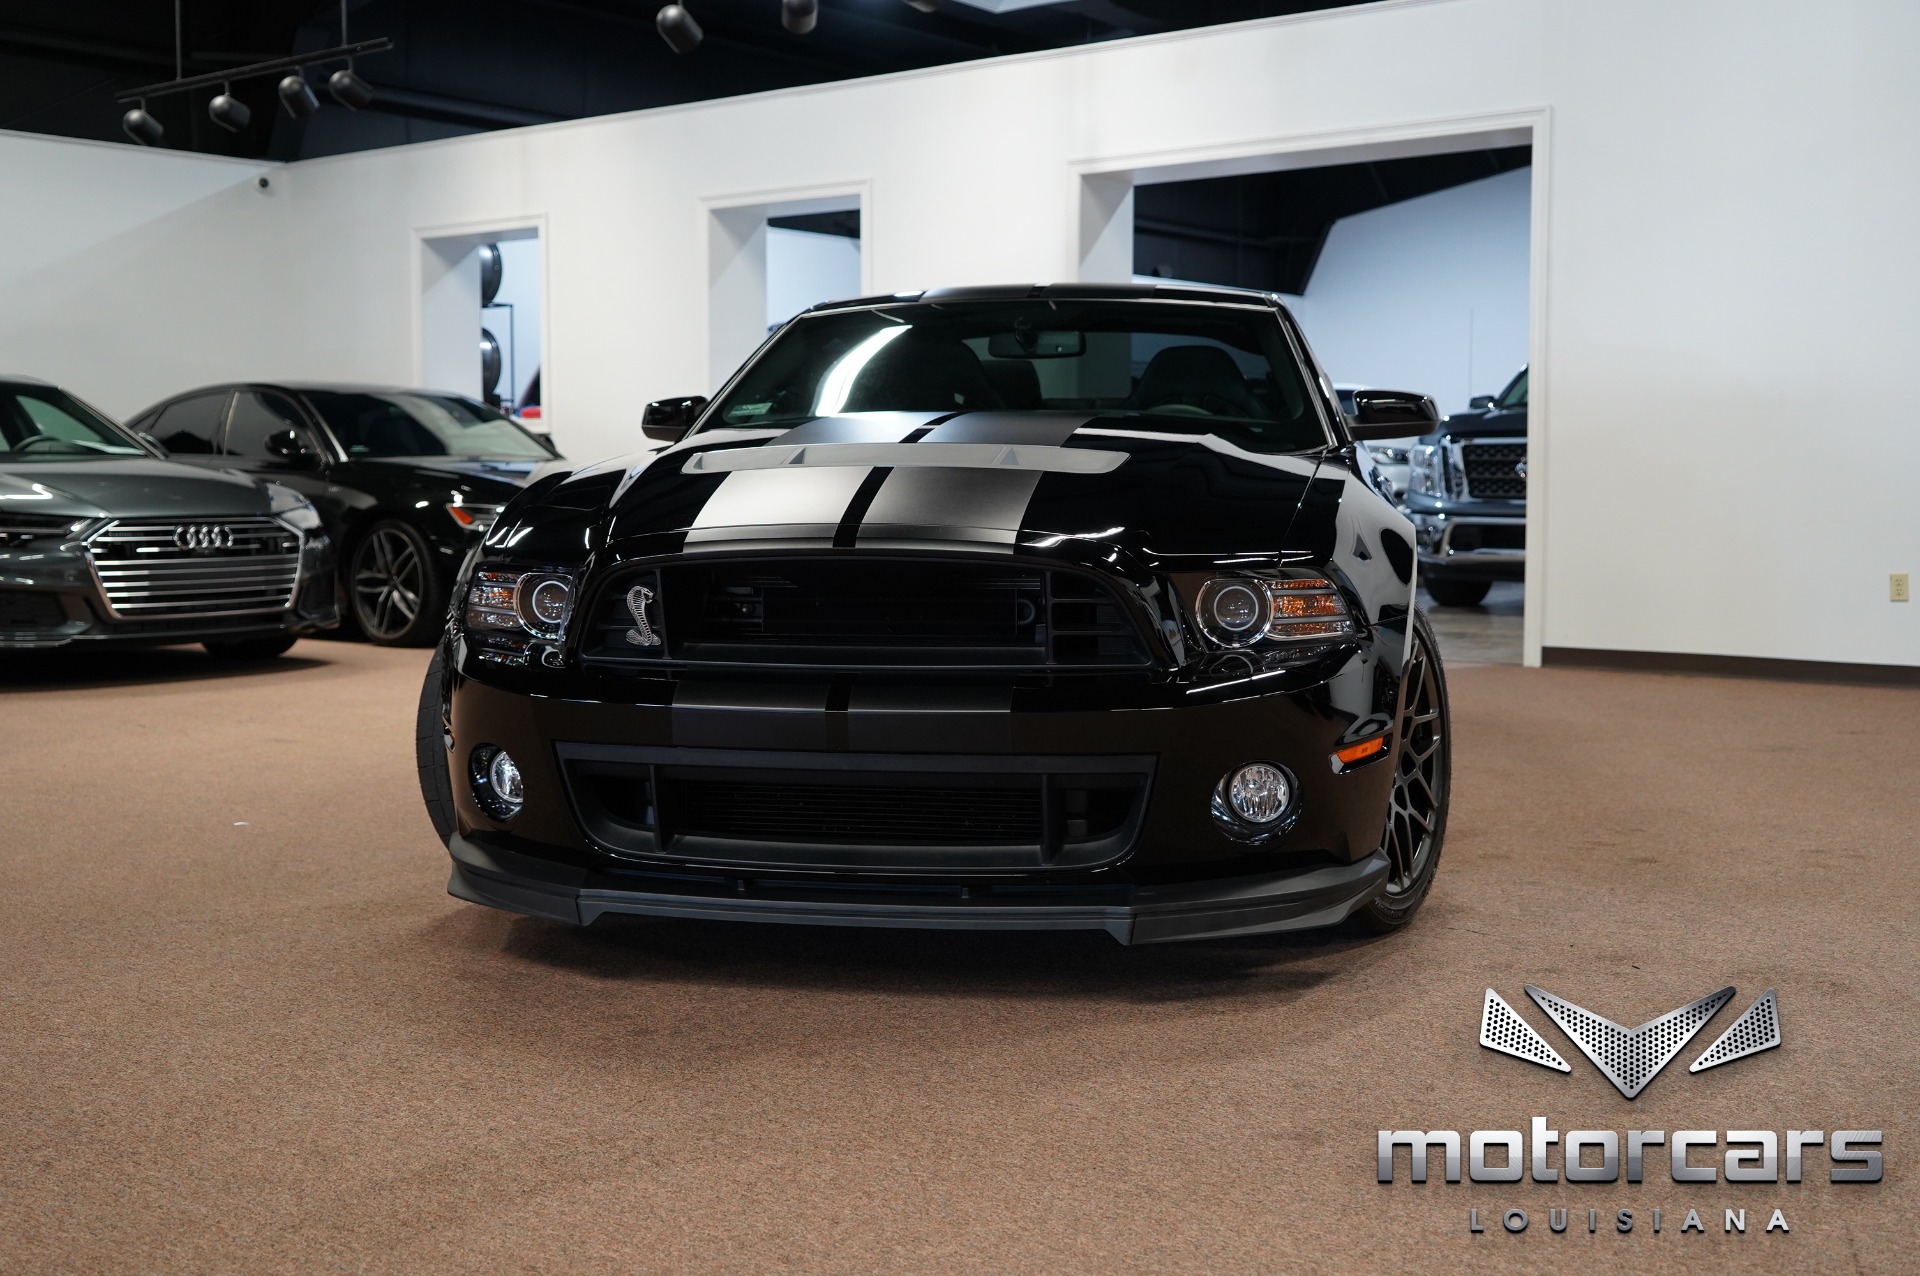 2013 Ford Shelby GT500 